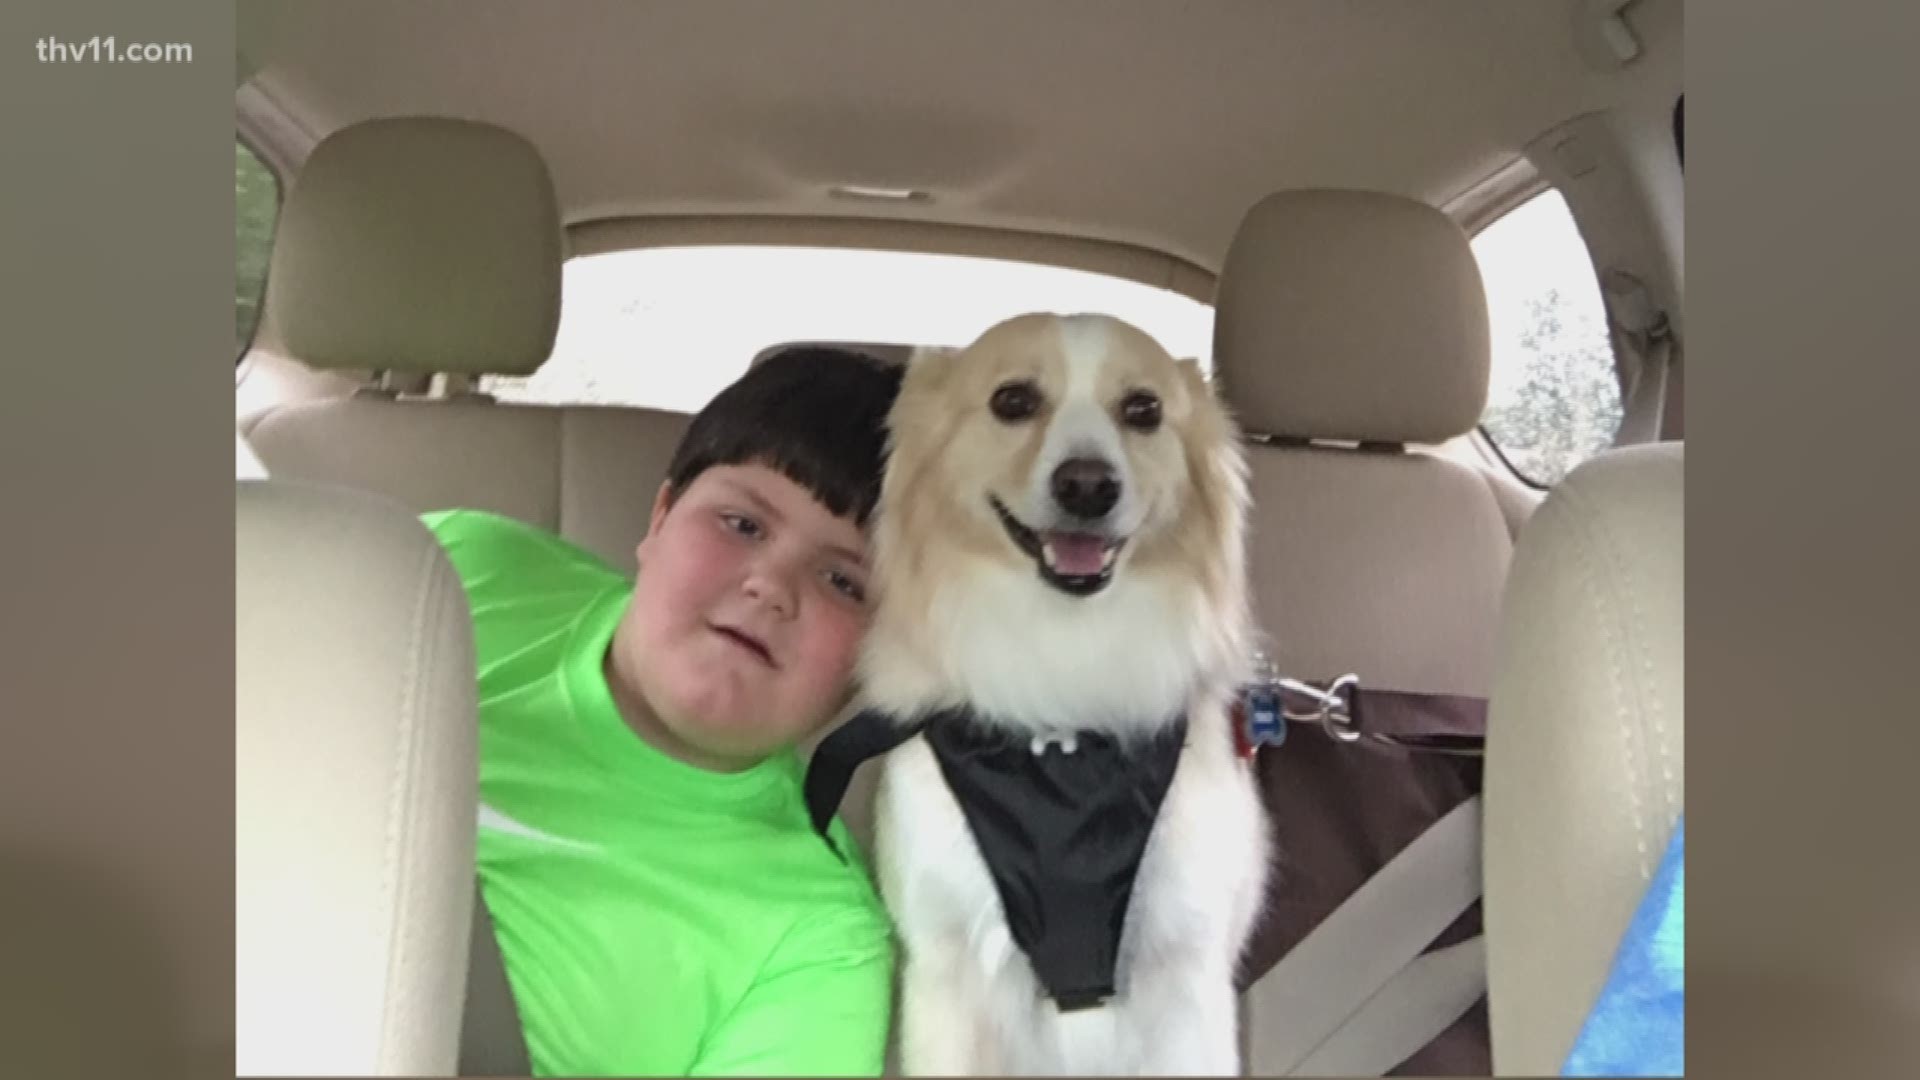 Tyler passed away in January. He was the first pediatric flu death in nearly four years in Arkansas. His parents have opened a nonprofit in his honor to help provide service dogs and more.